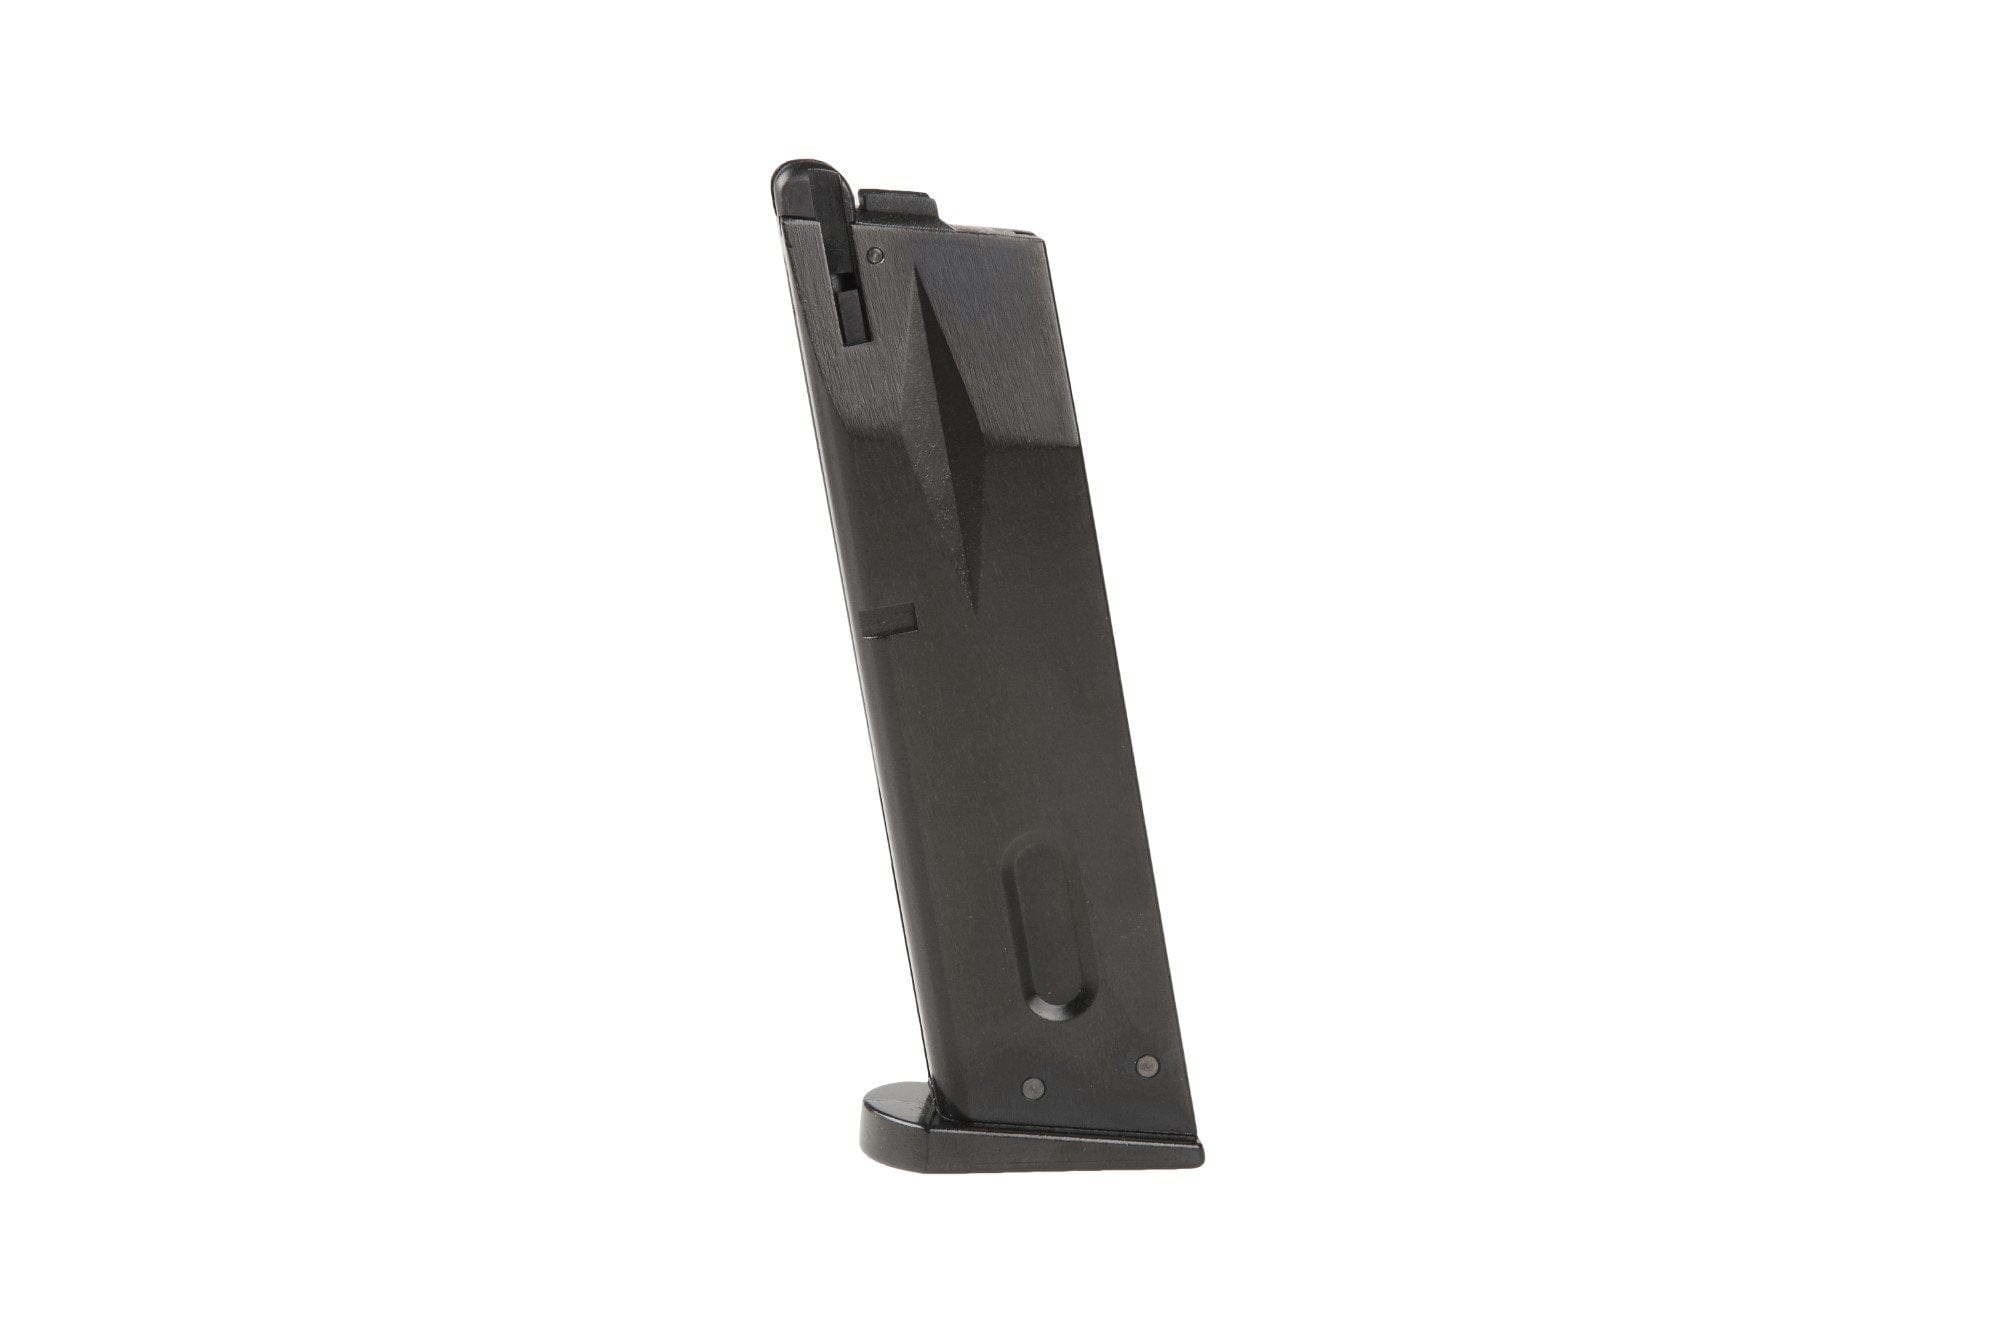 Low-Cap 25 BB Gas Magazine for WE M9/M92F Replicas - Black by WE on Airsoft Mania Europe